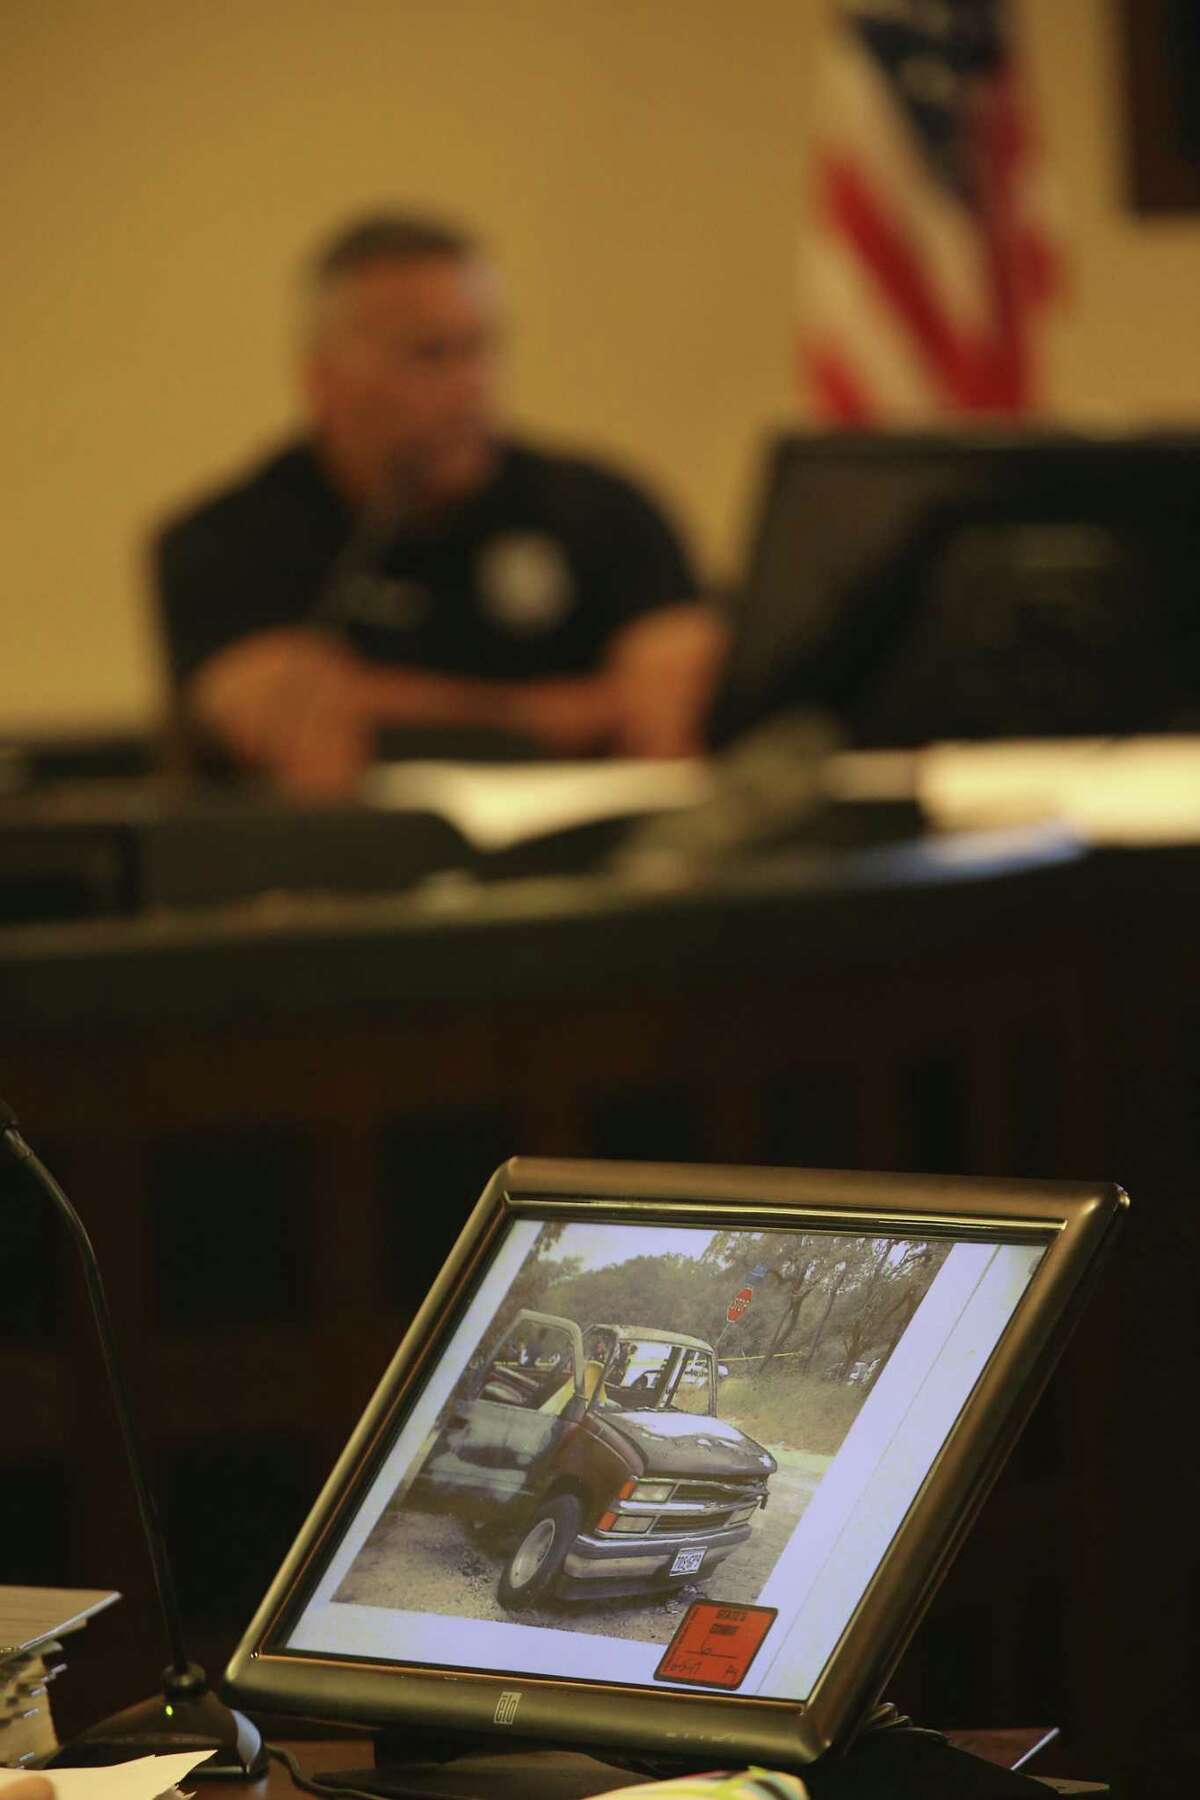 Photographs from the scene are introduced as evidence during the second day of the murder trial of Joel Soto on Tuesday in the Bexar County 379th Criminal District Court. Soto is accused in the November 2013 death of his 2-year-old grandson, Jeremy Soto. San Antonio Fire Department Arson Investigator Juan Martinez is on the witness stand.